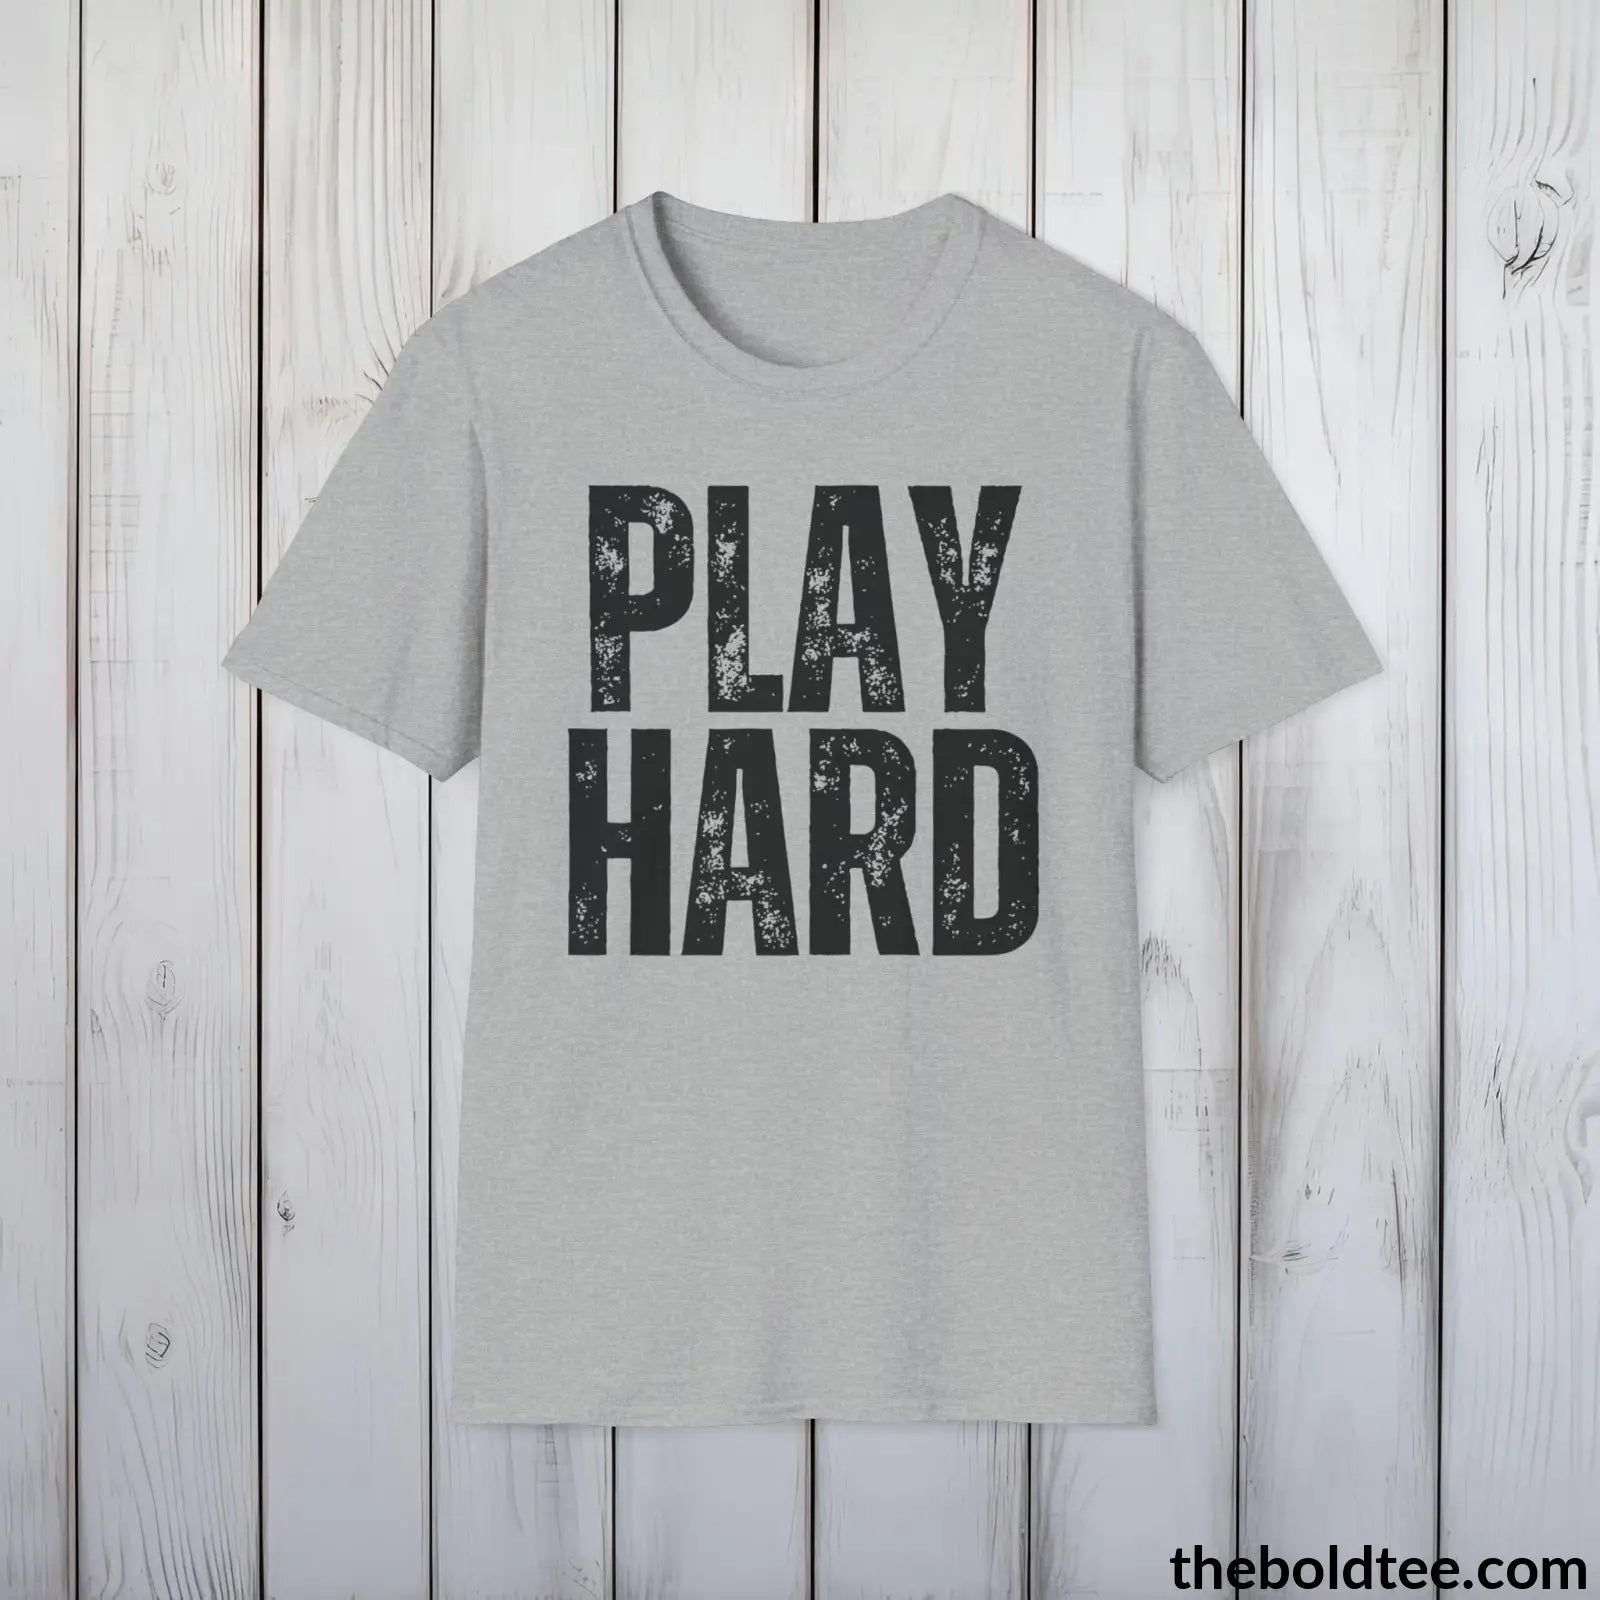 T-Shirt Sport Grey / S PLAY HARD Basketball Tee - Sustainable & Soft Cotton Crewneck Unisex T-Shirt - 9 Bold Colors